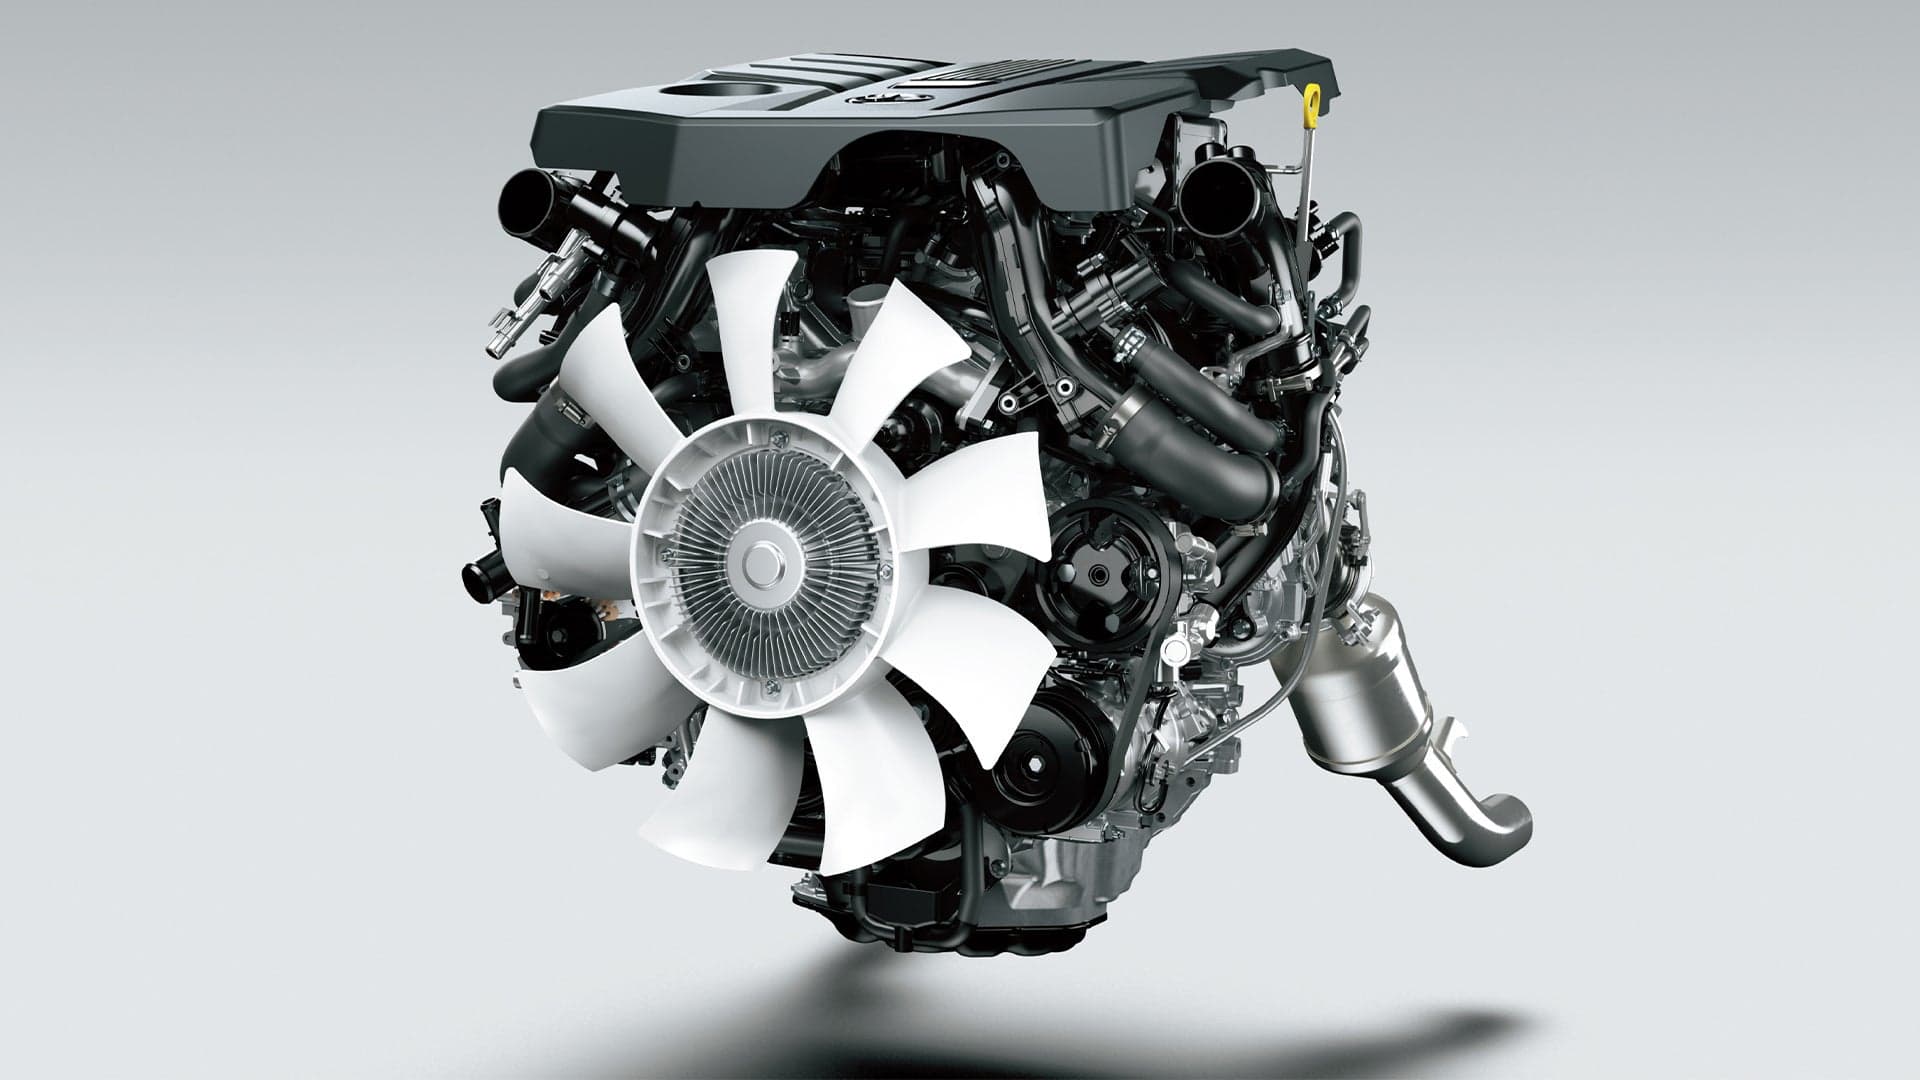 What the New Land Cruiser’s Engine Tells Us About the Next-Gen Toyota Tundra